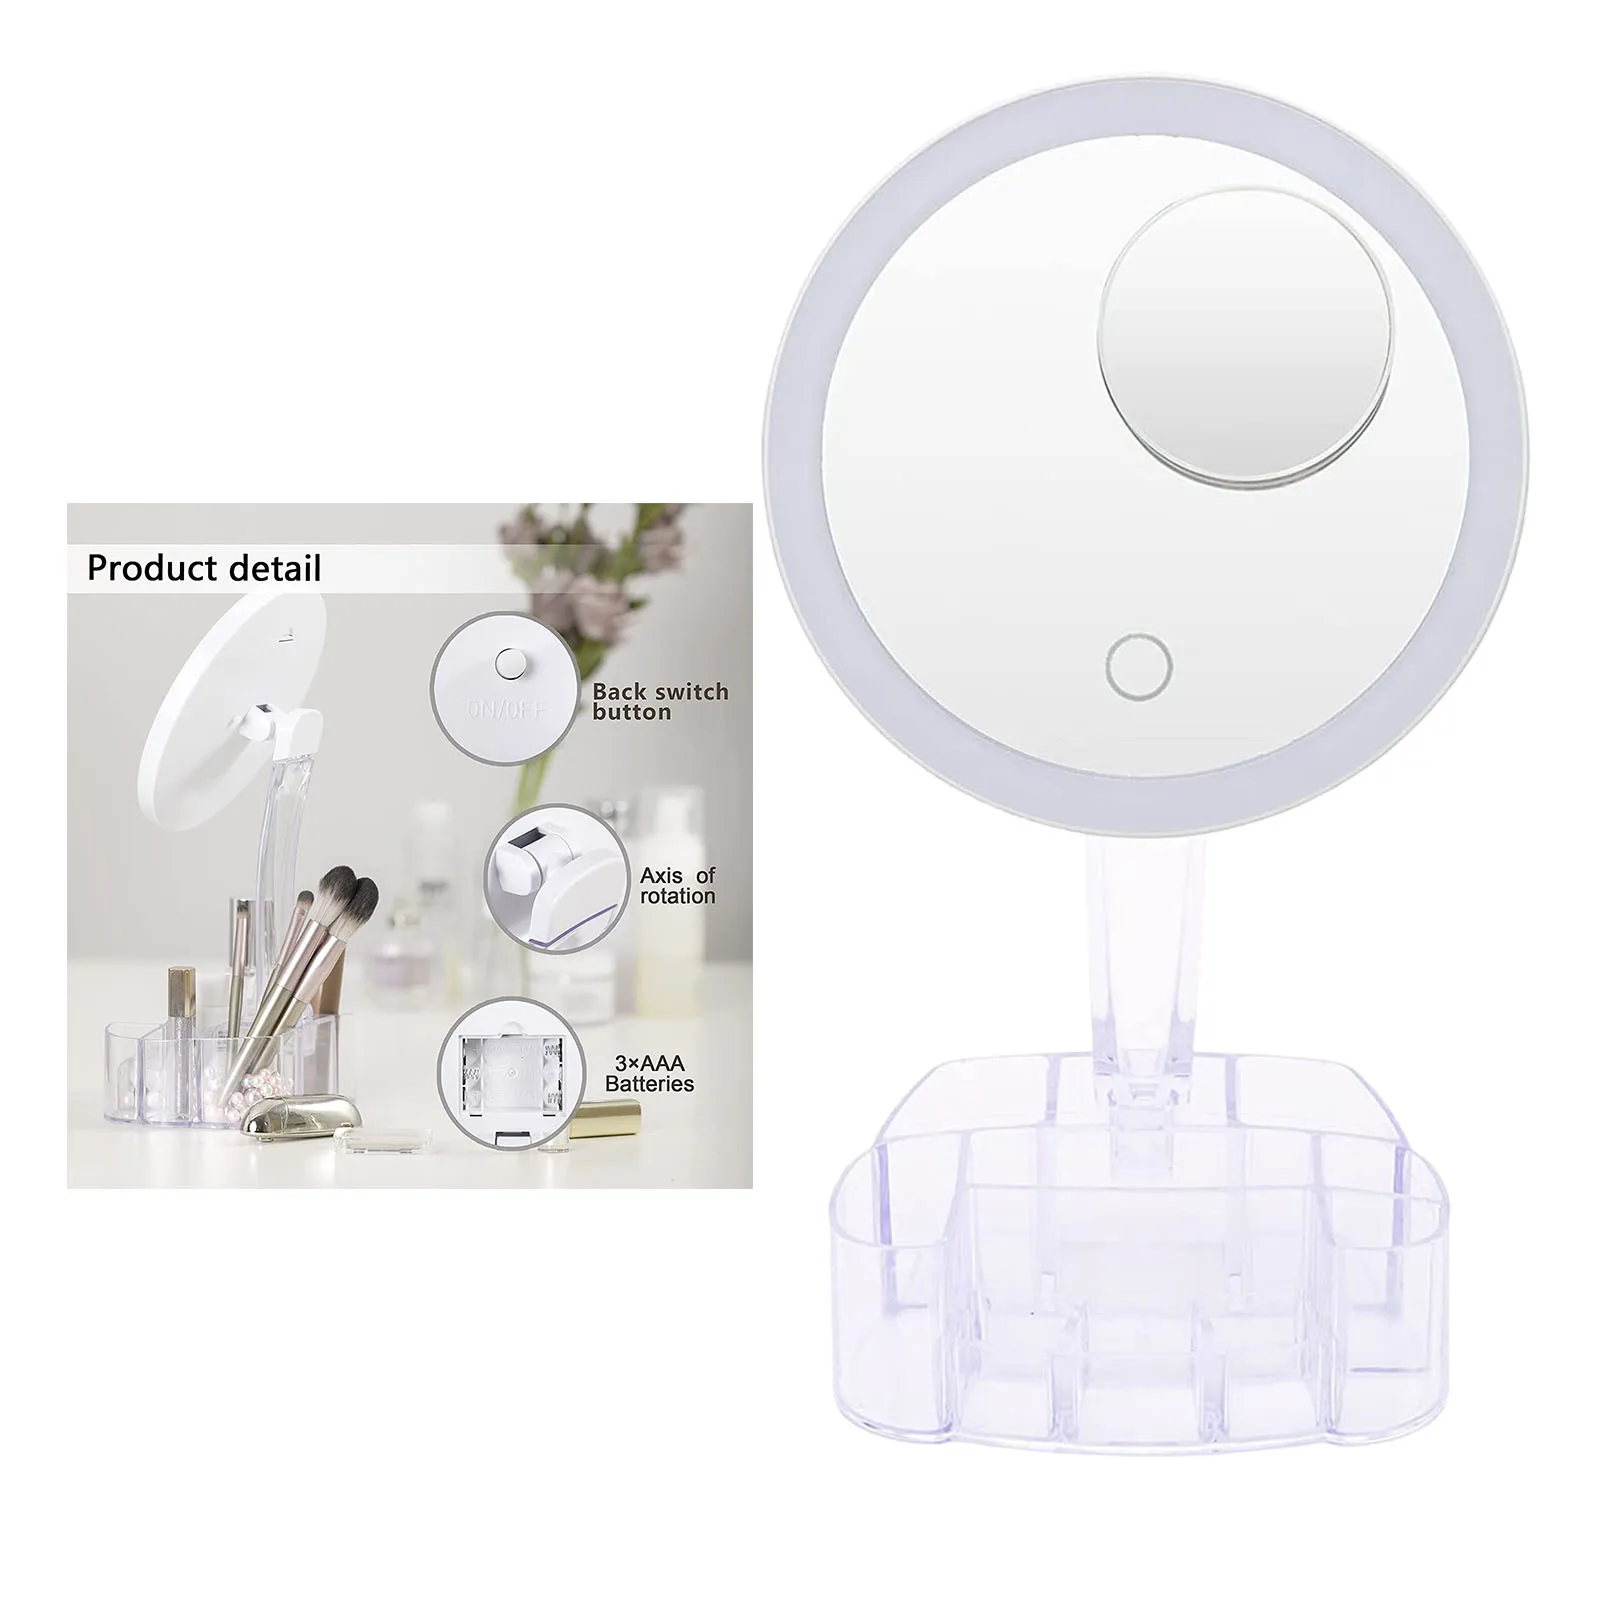 Makeup Mirrors with 26x LED Lights Lighted Cosmetic Mirror 90 Rotation